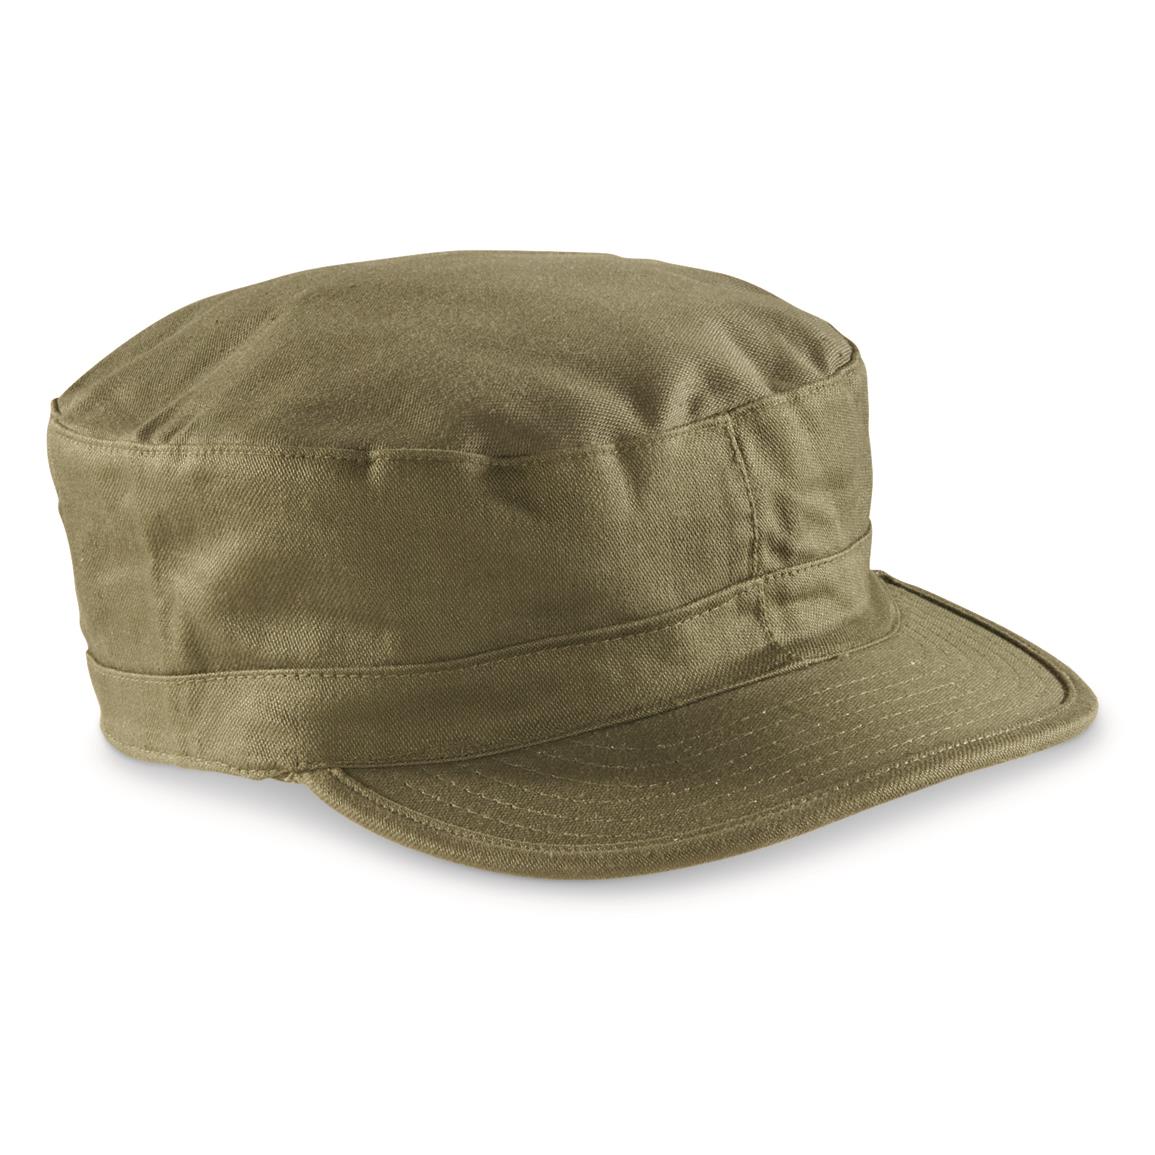 U.S. Military Style Ranger Hat, 6 Pack, New, Olive Drab